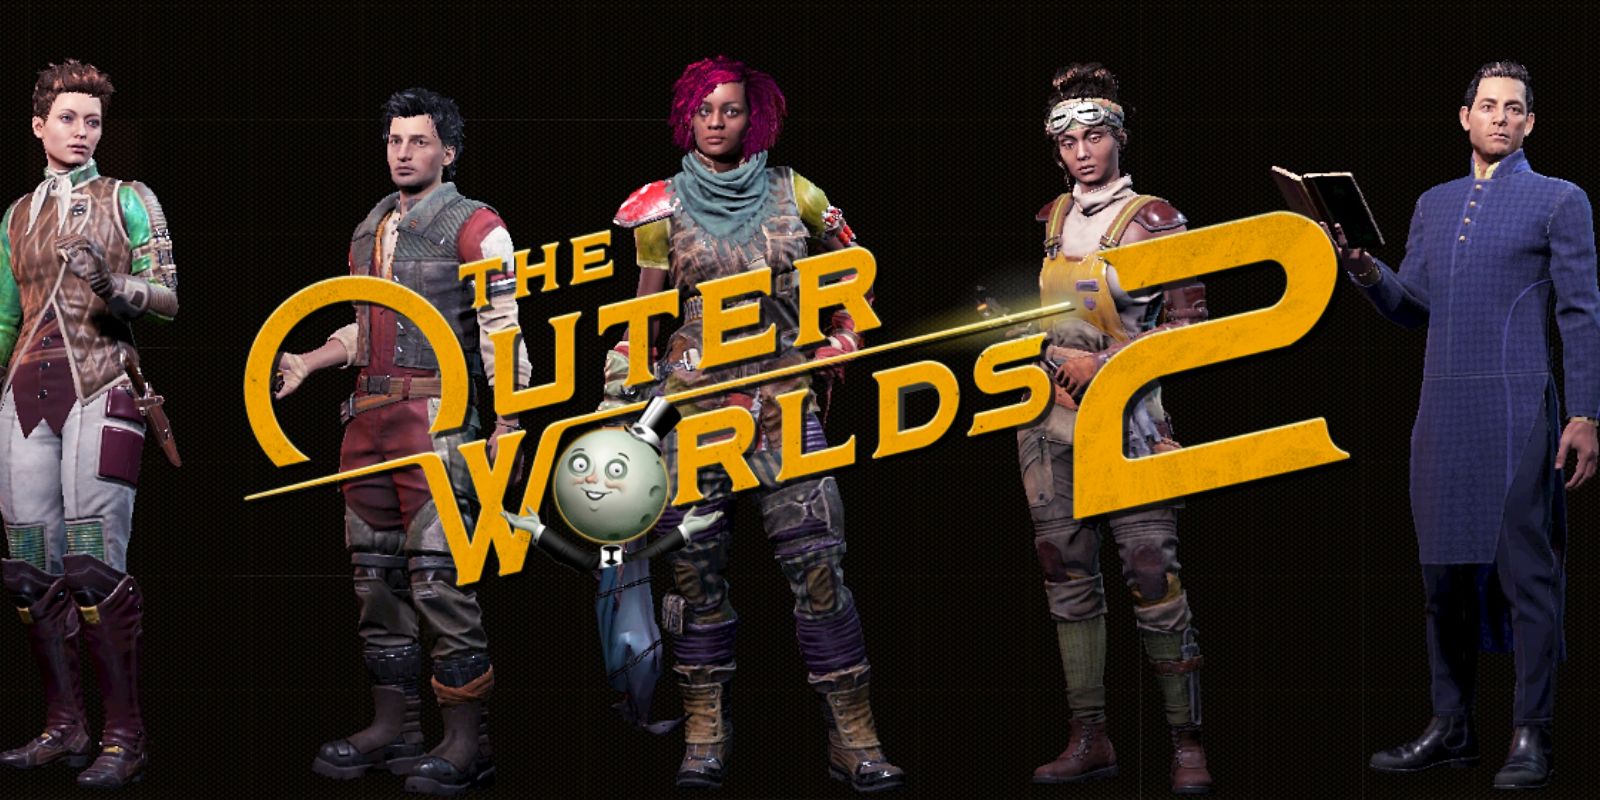 the outer worlds 2 ps4